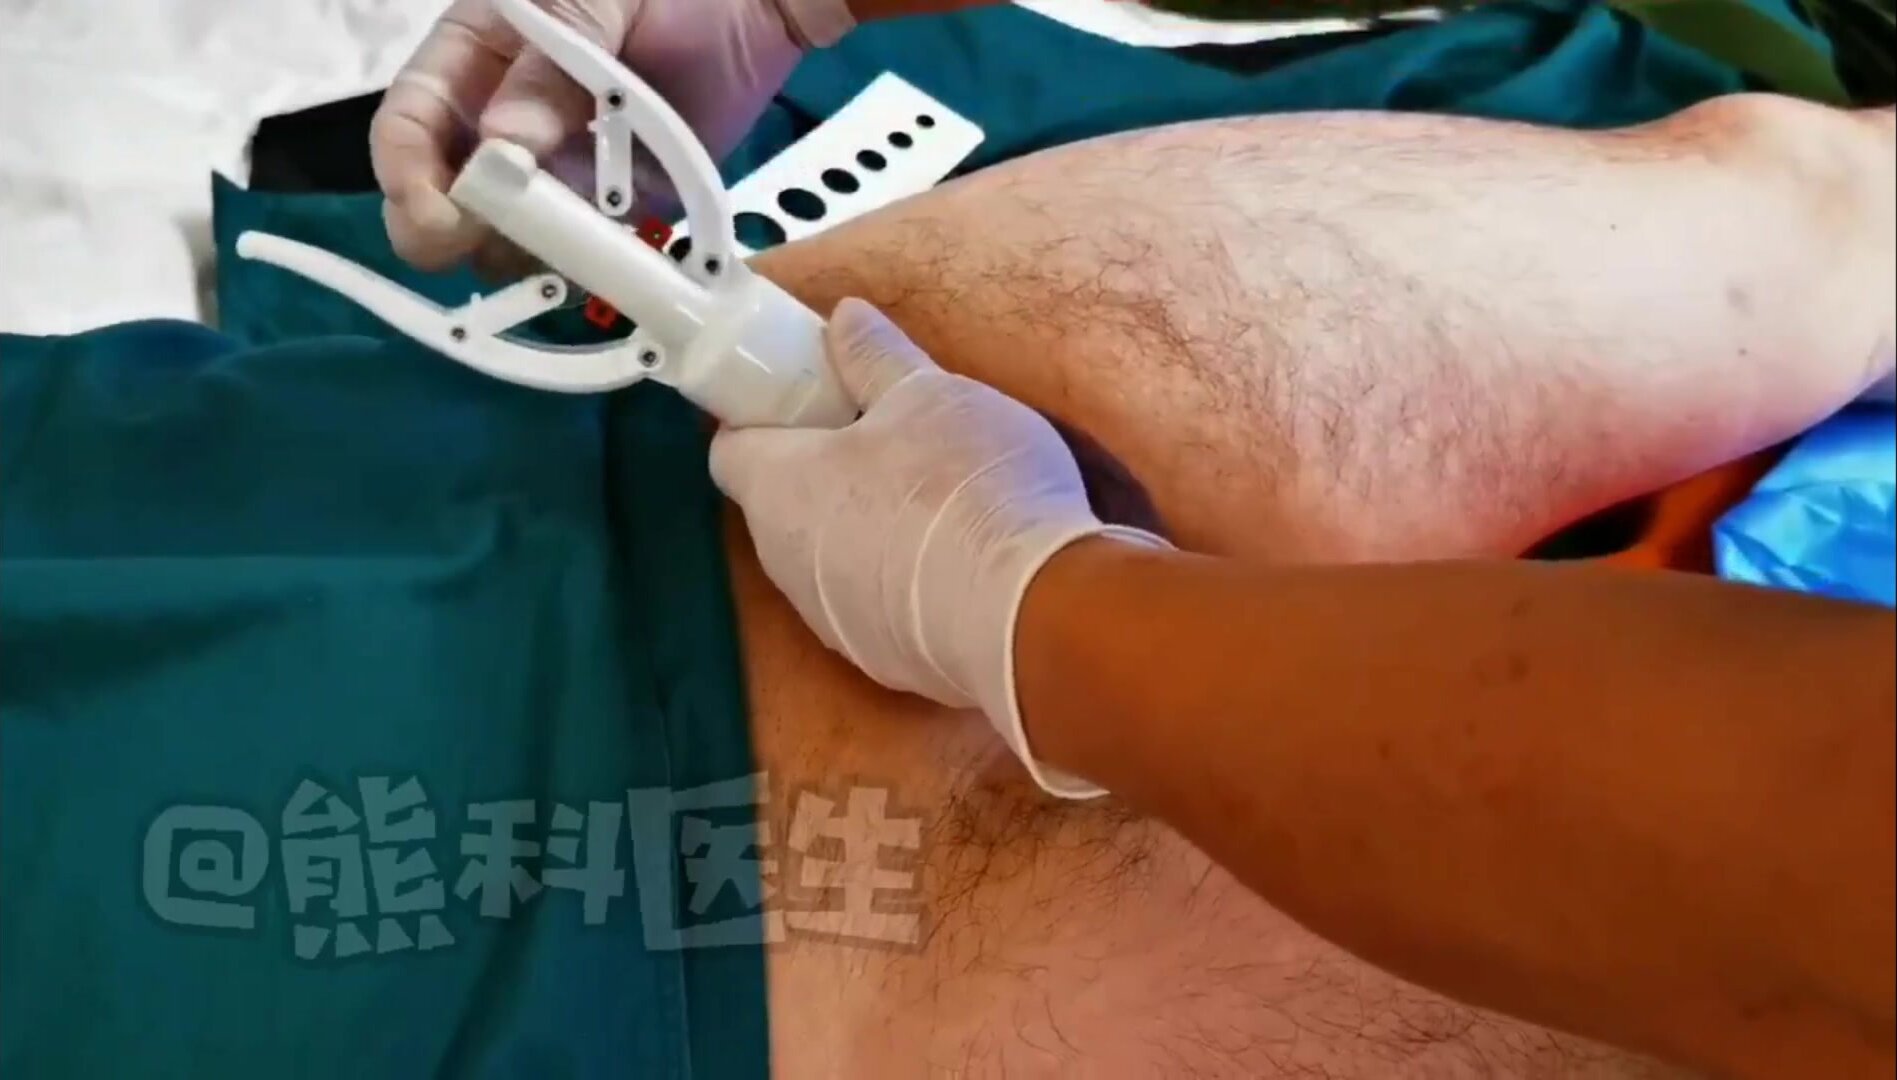 Stapler circumcision without anesthetic - ThisVid.com